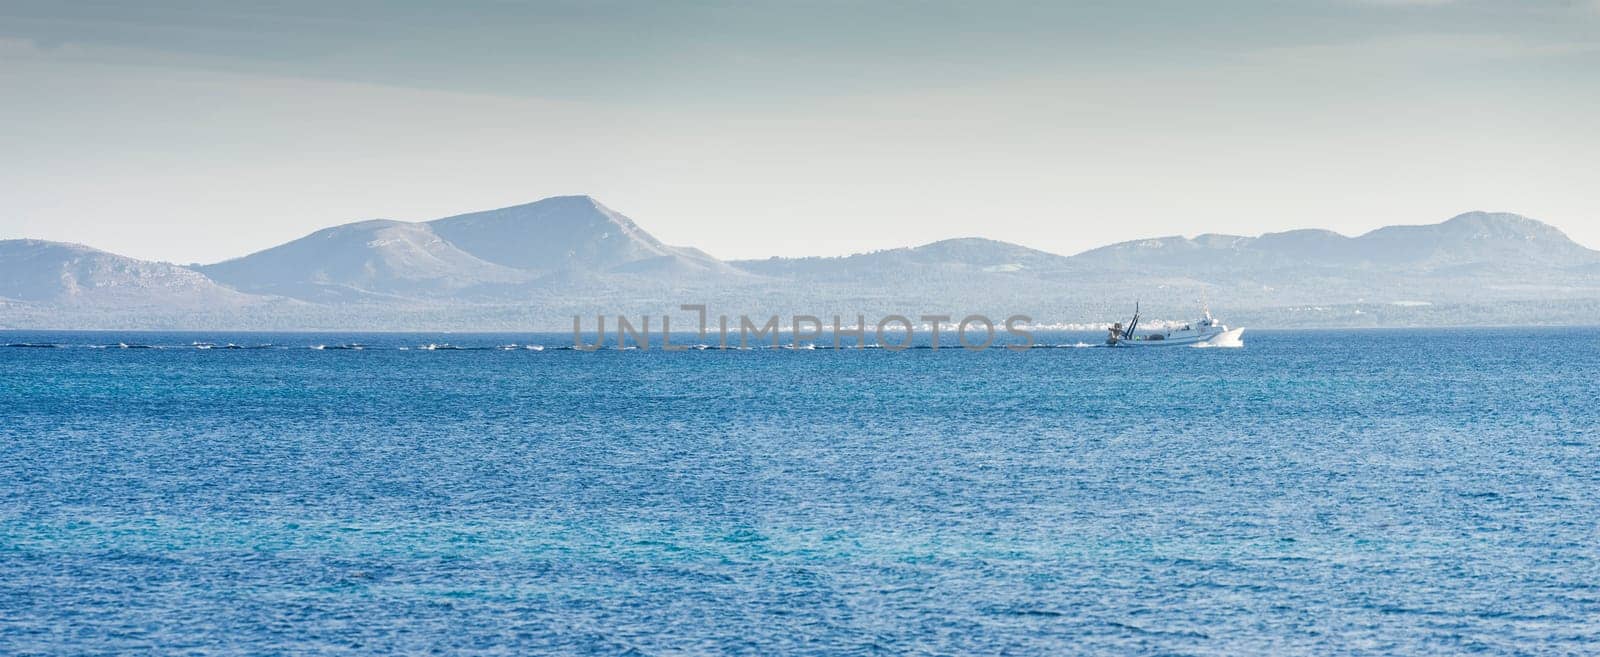 A fishing trawler cuts through the cobalt blue waters, its wake creating a frothy trail, set against the serene backdrop of distant mountains under a clear sky.